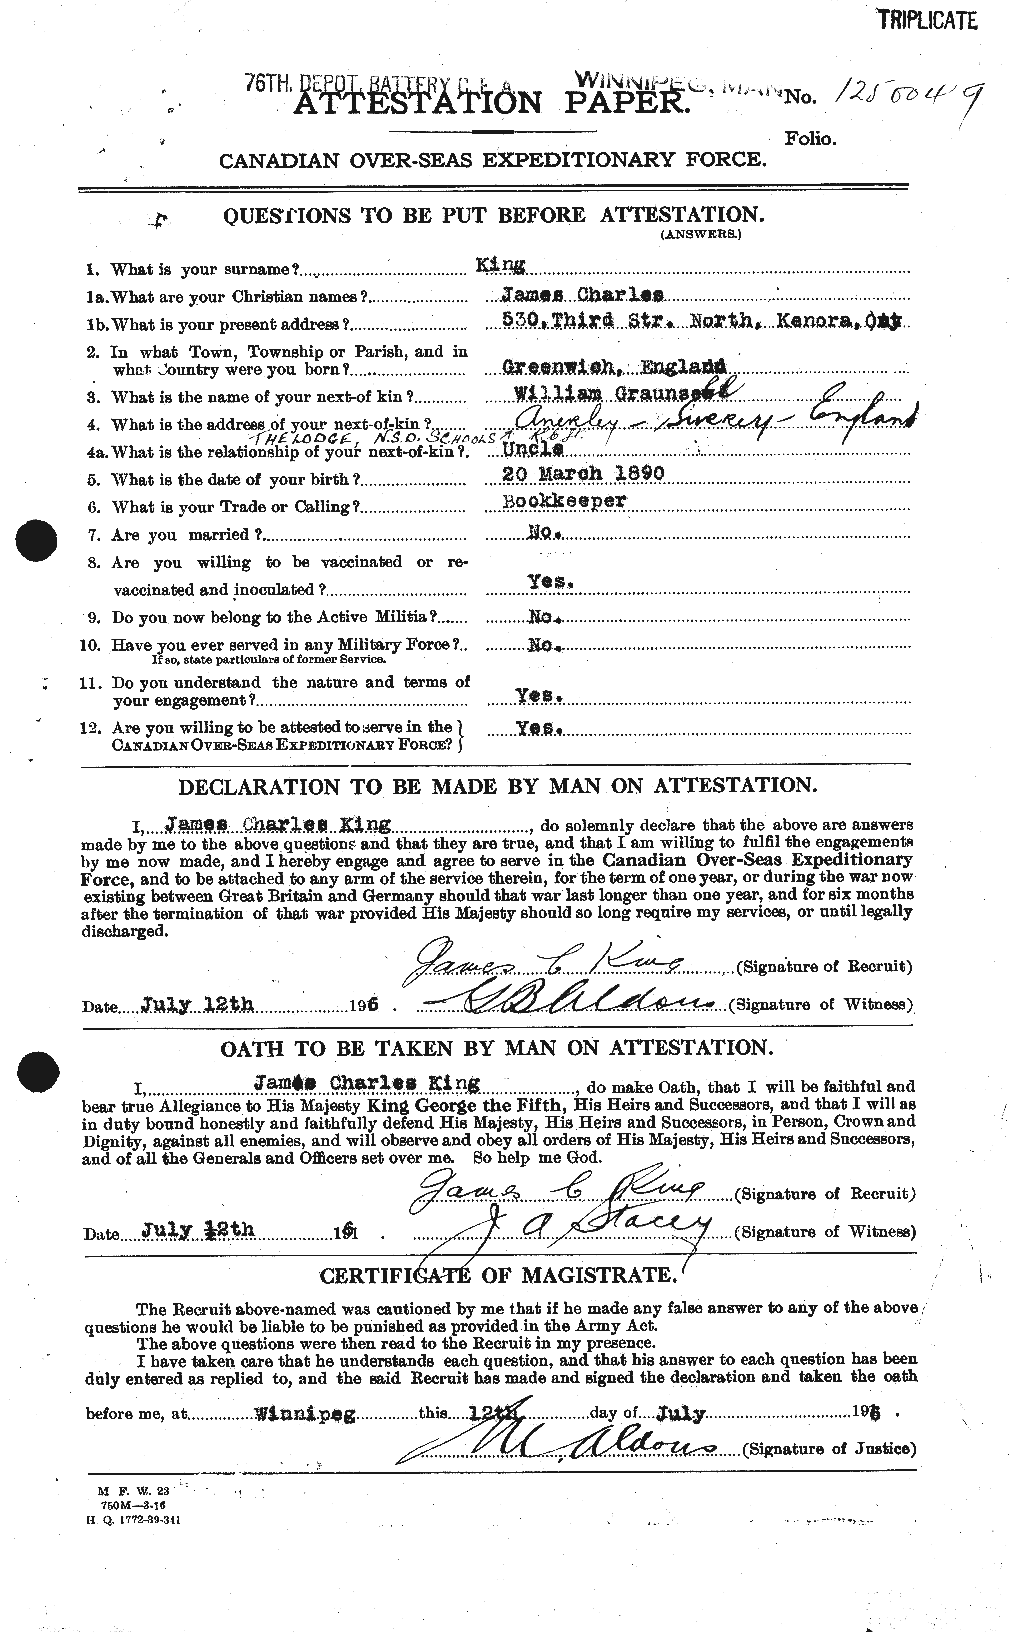 Personnel Records of the First World War - CEF 436629a